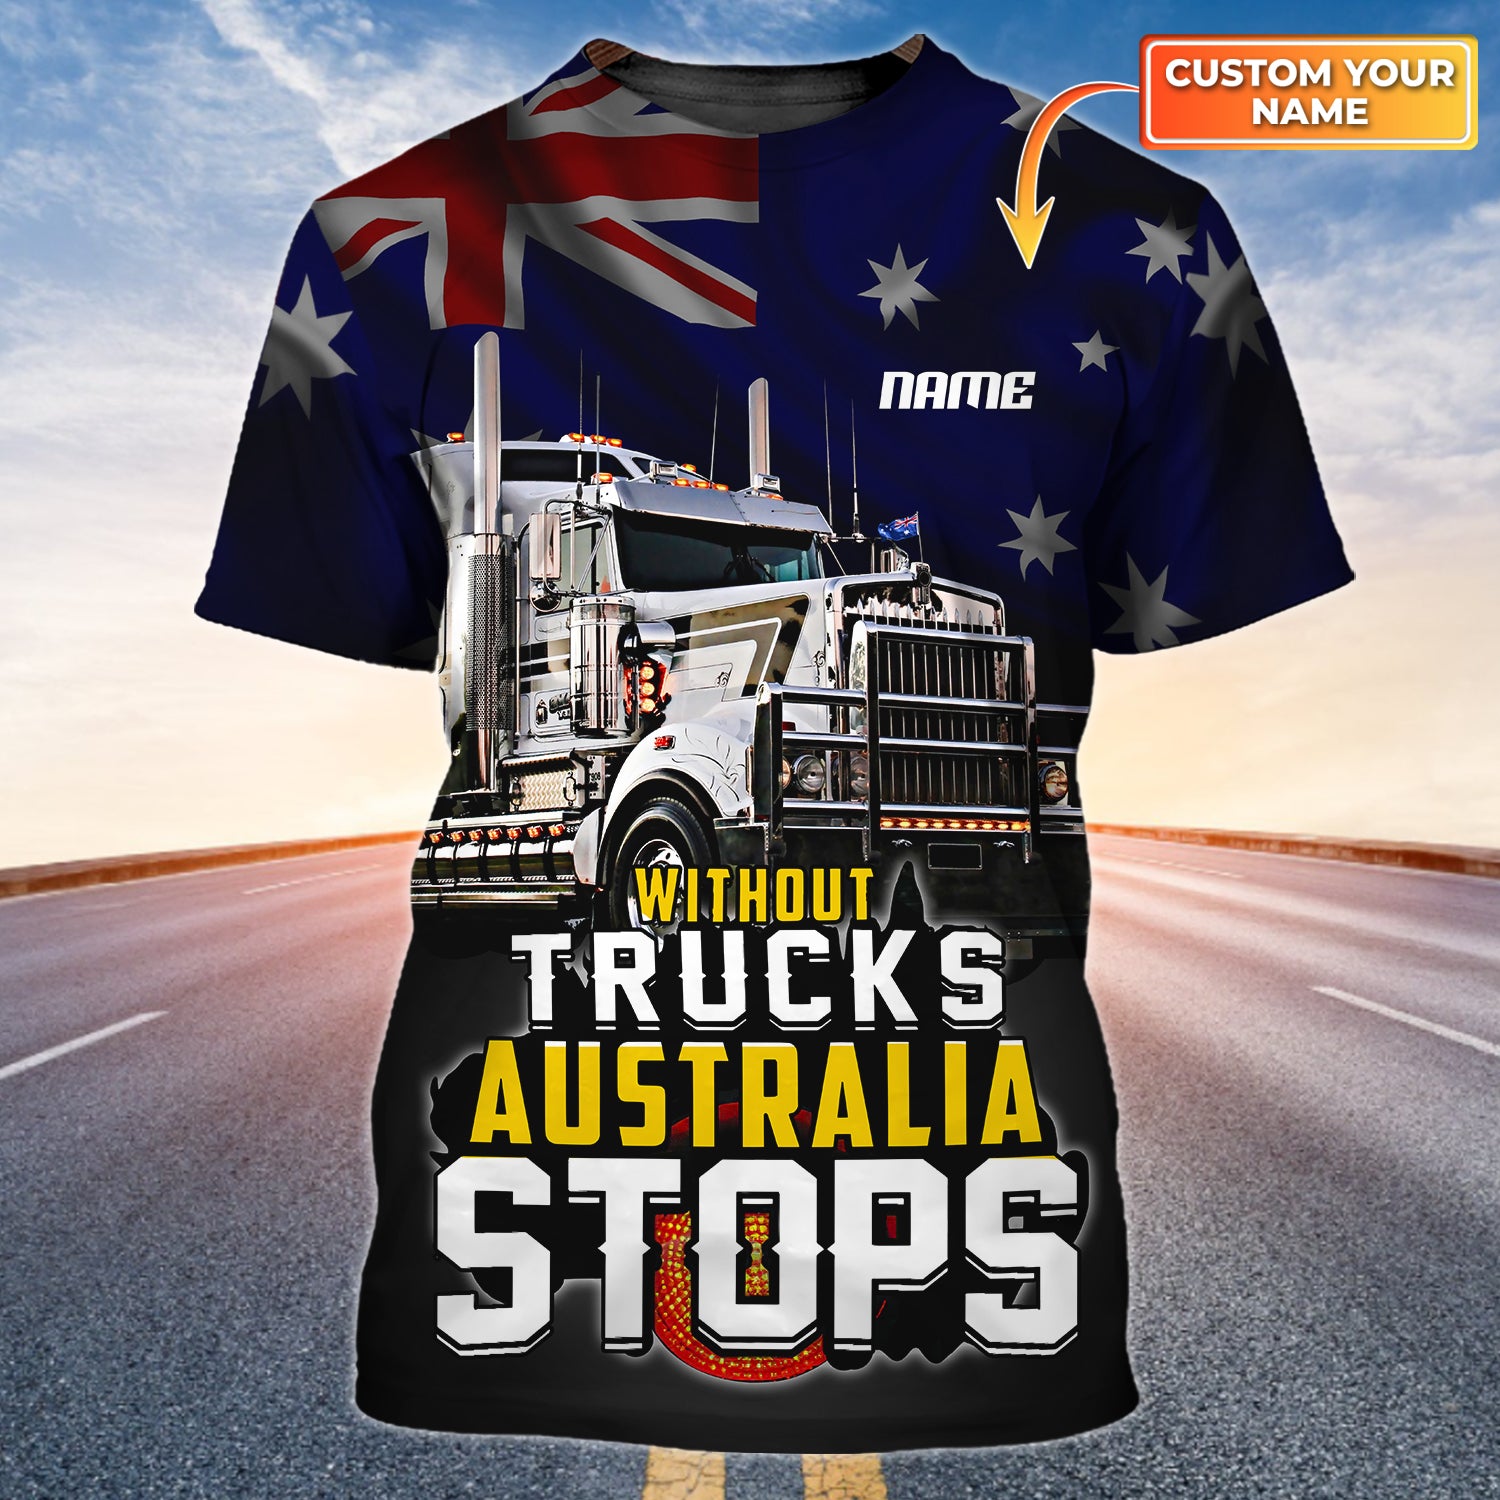 Without Trucks Australia Stops Personalized Name 3D Tshirt 172, Nvc97